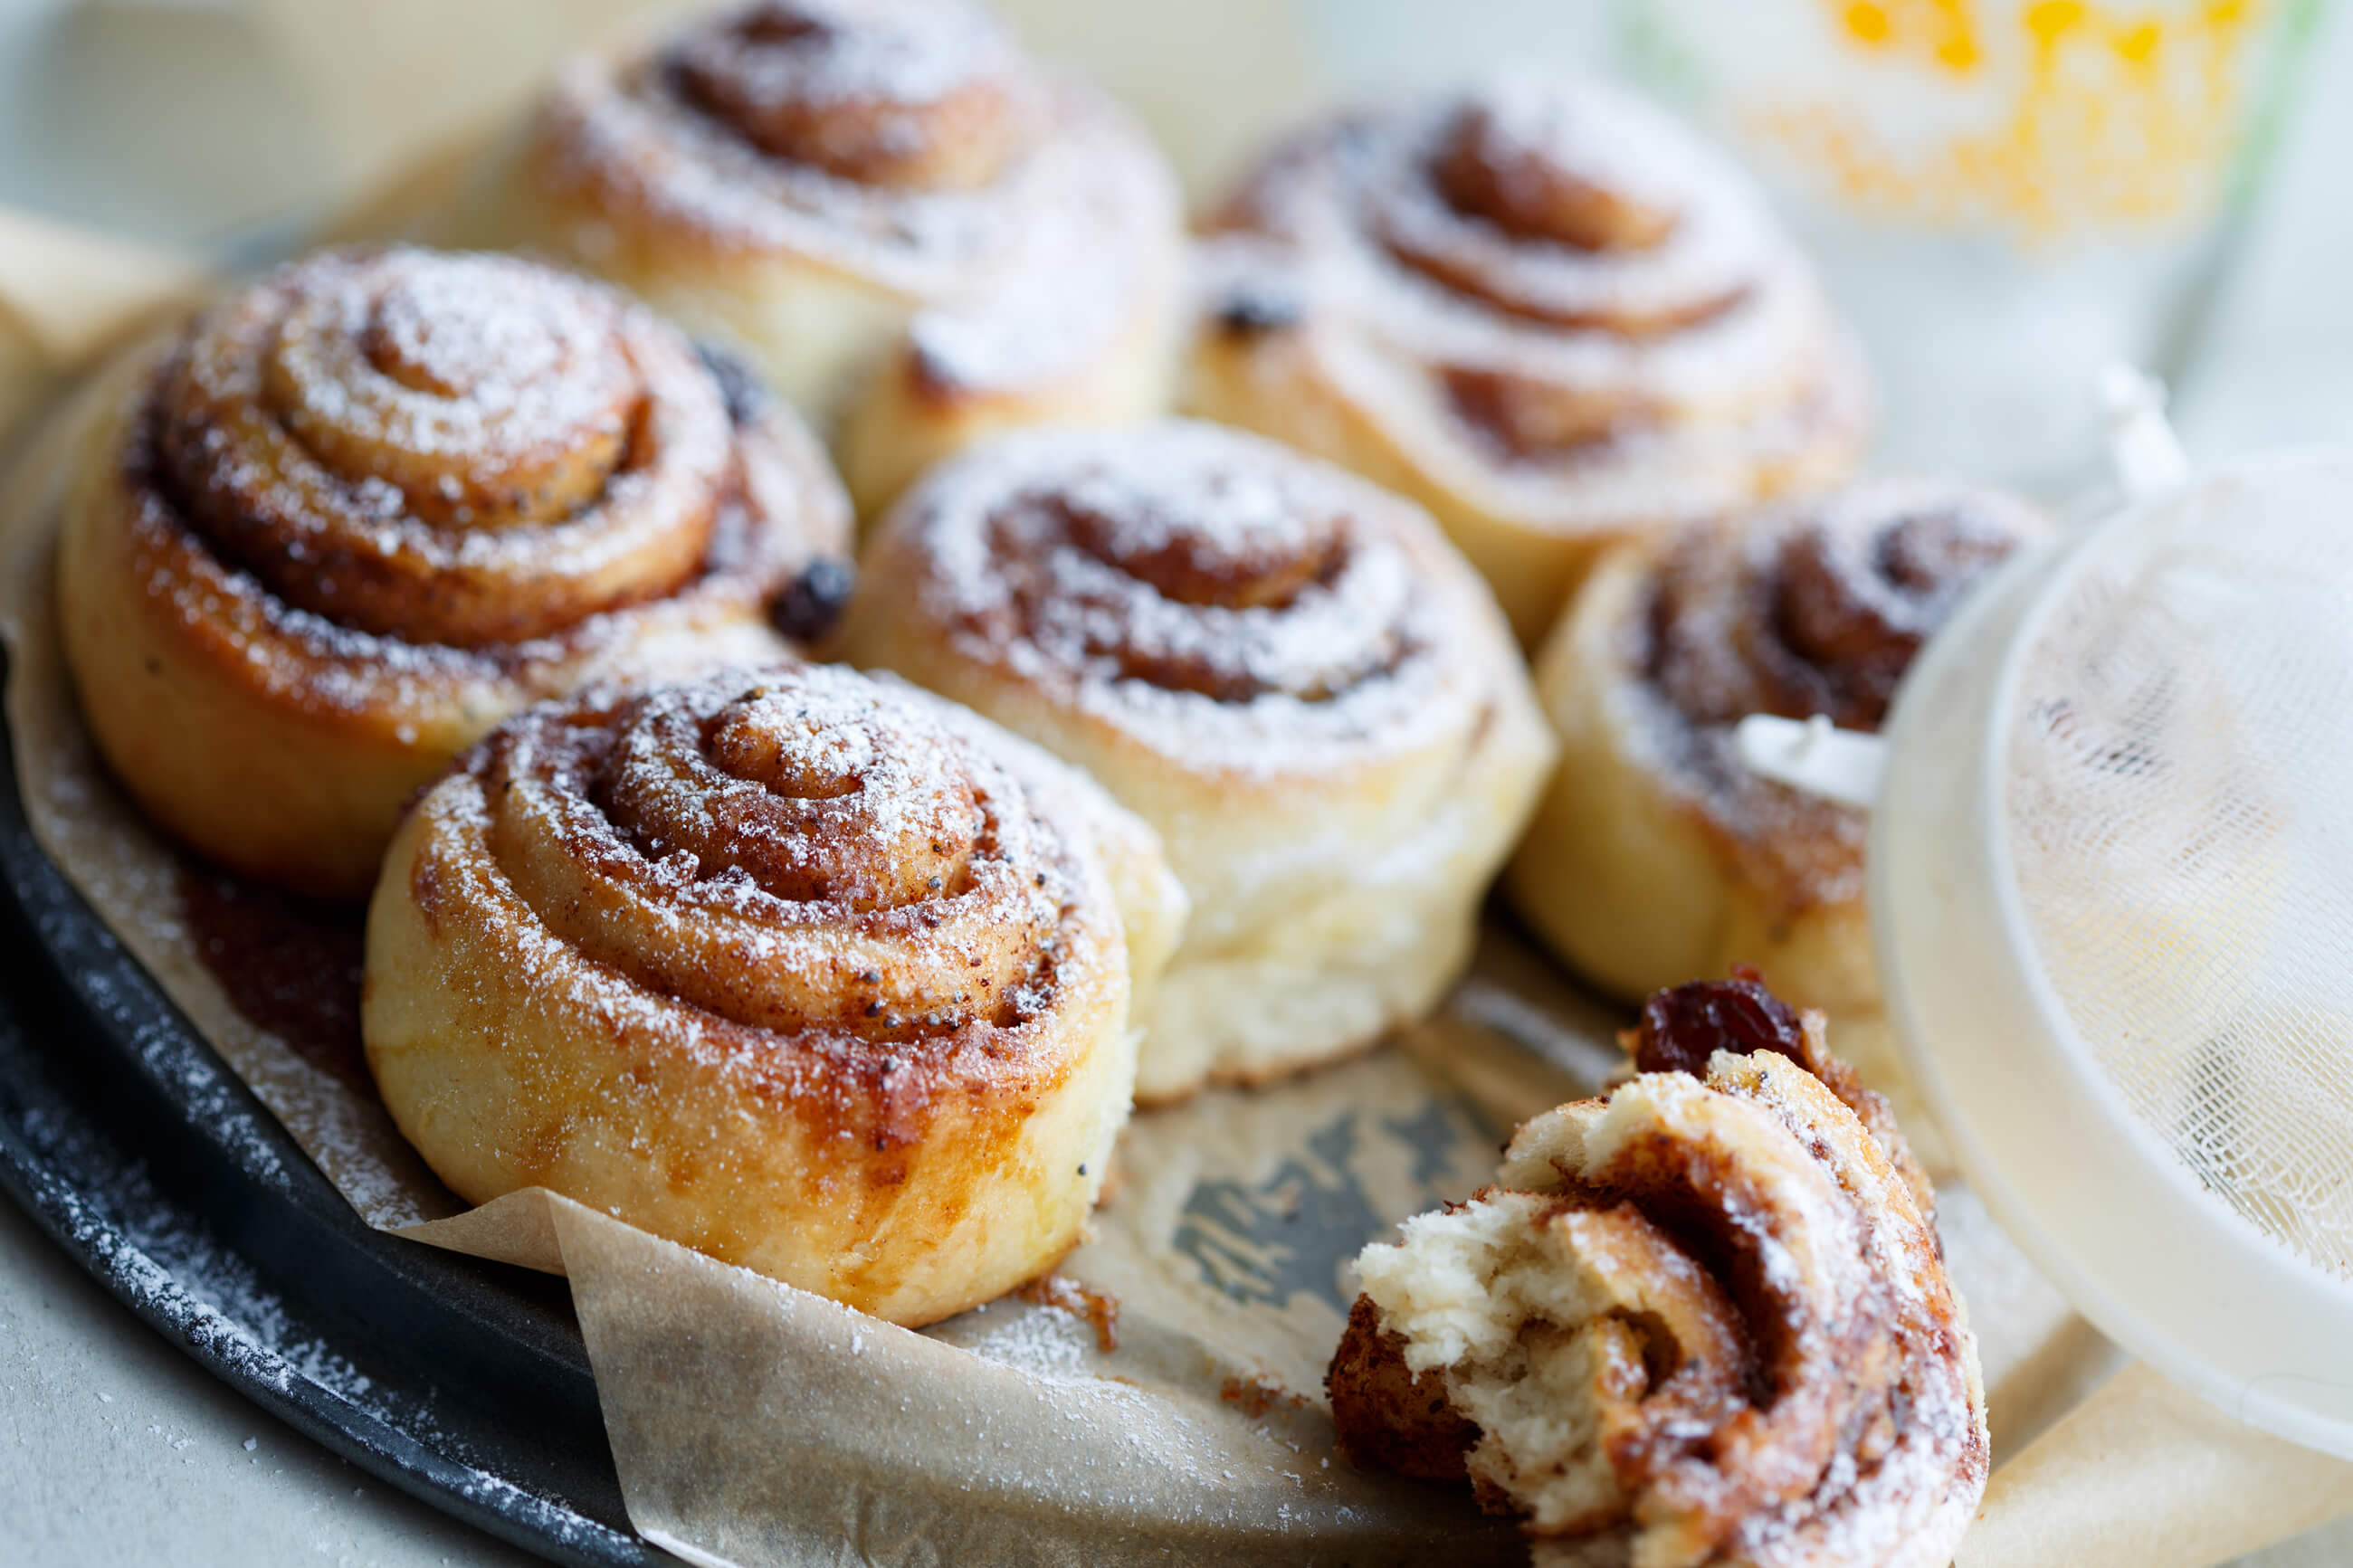 Recipe of the Month: Perfect Pillowy Cinnamon Rolls